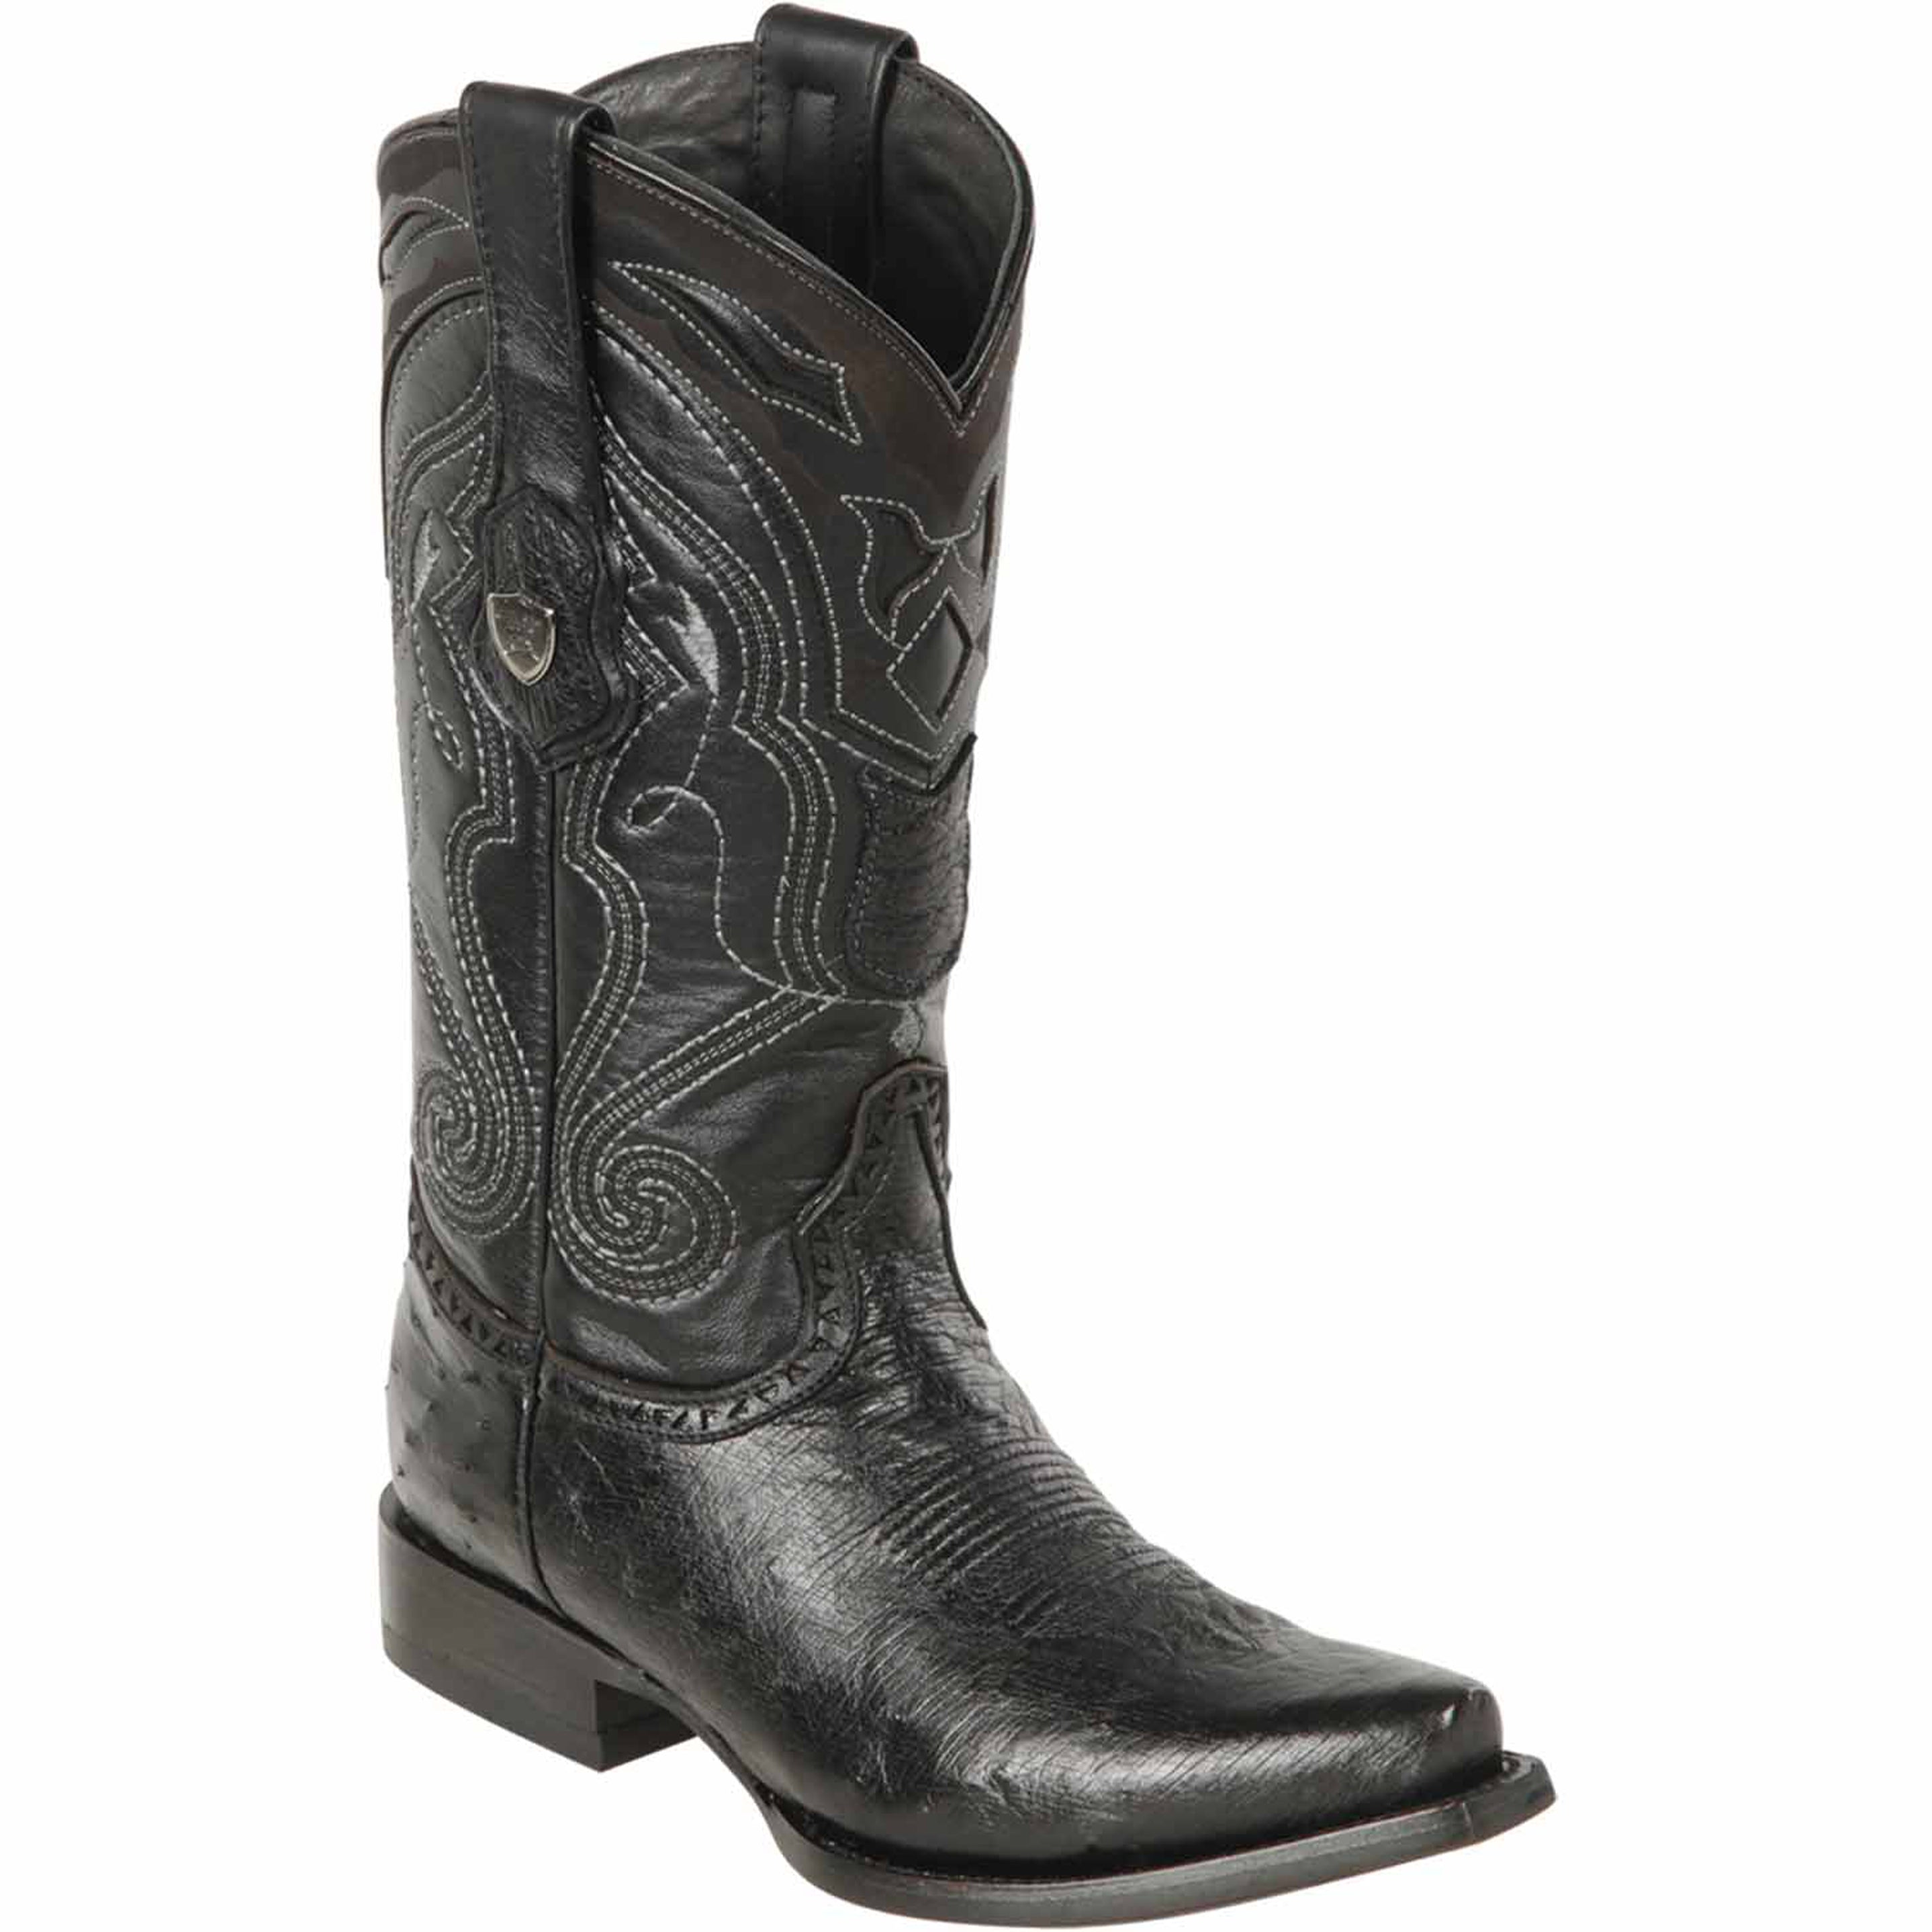 Black Smooth Ostrich Boots Snip Toe - Wild West Boots